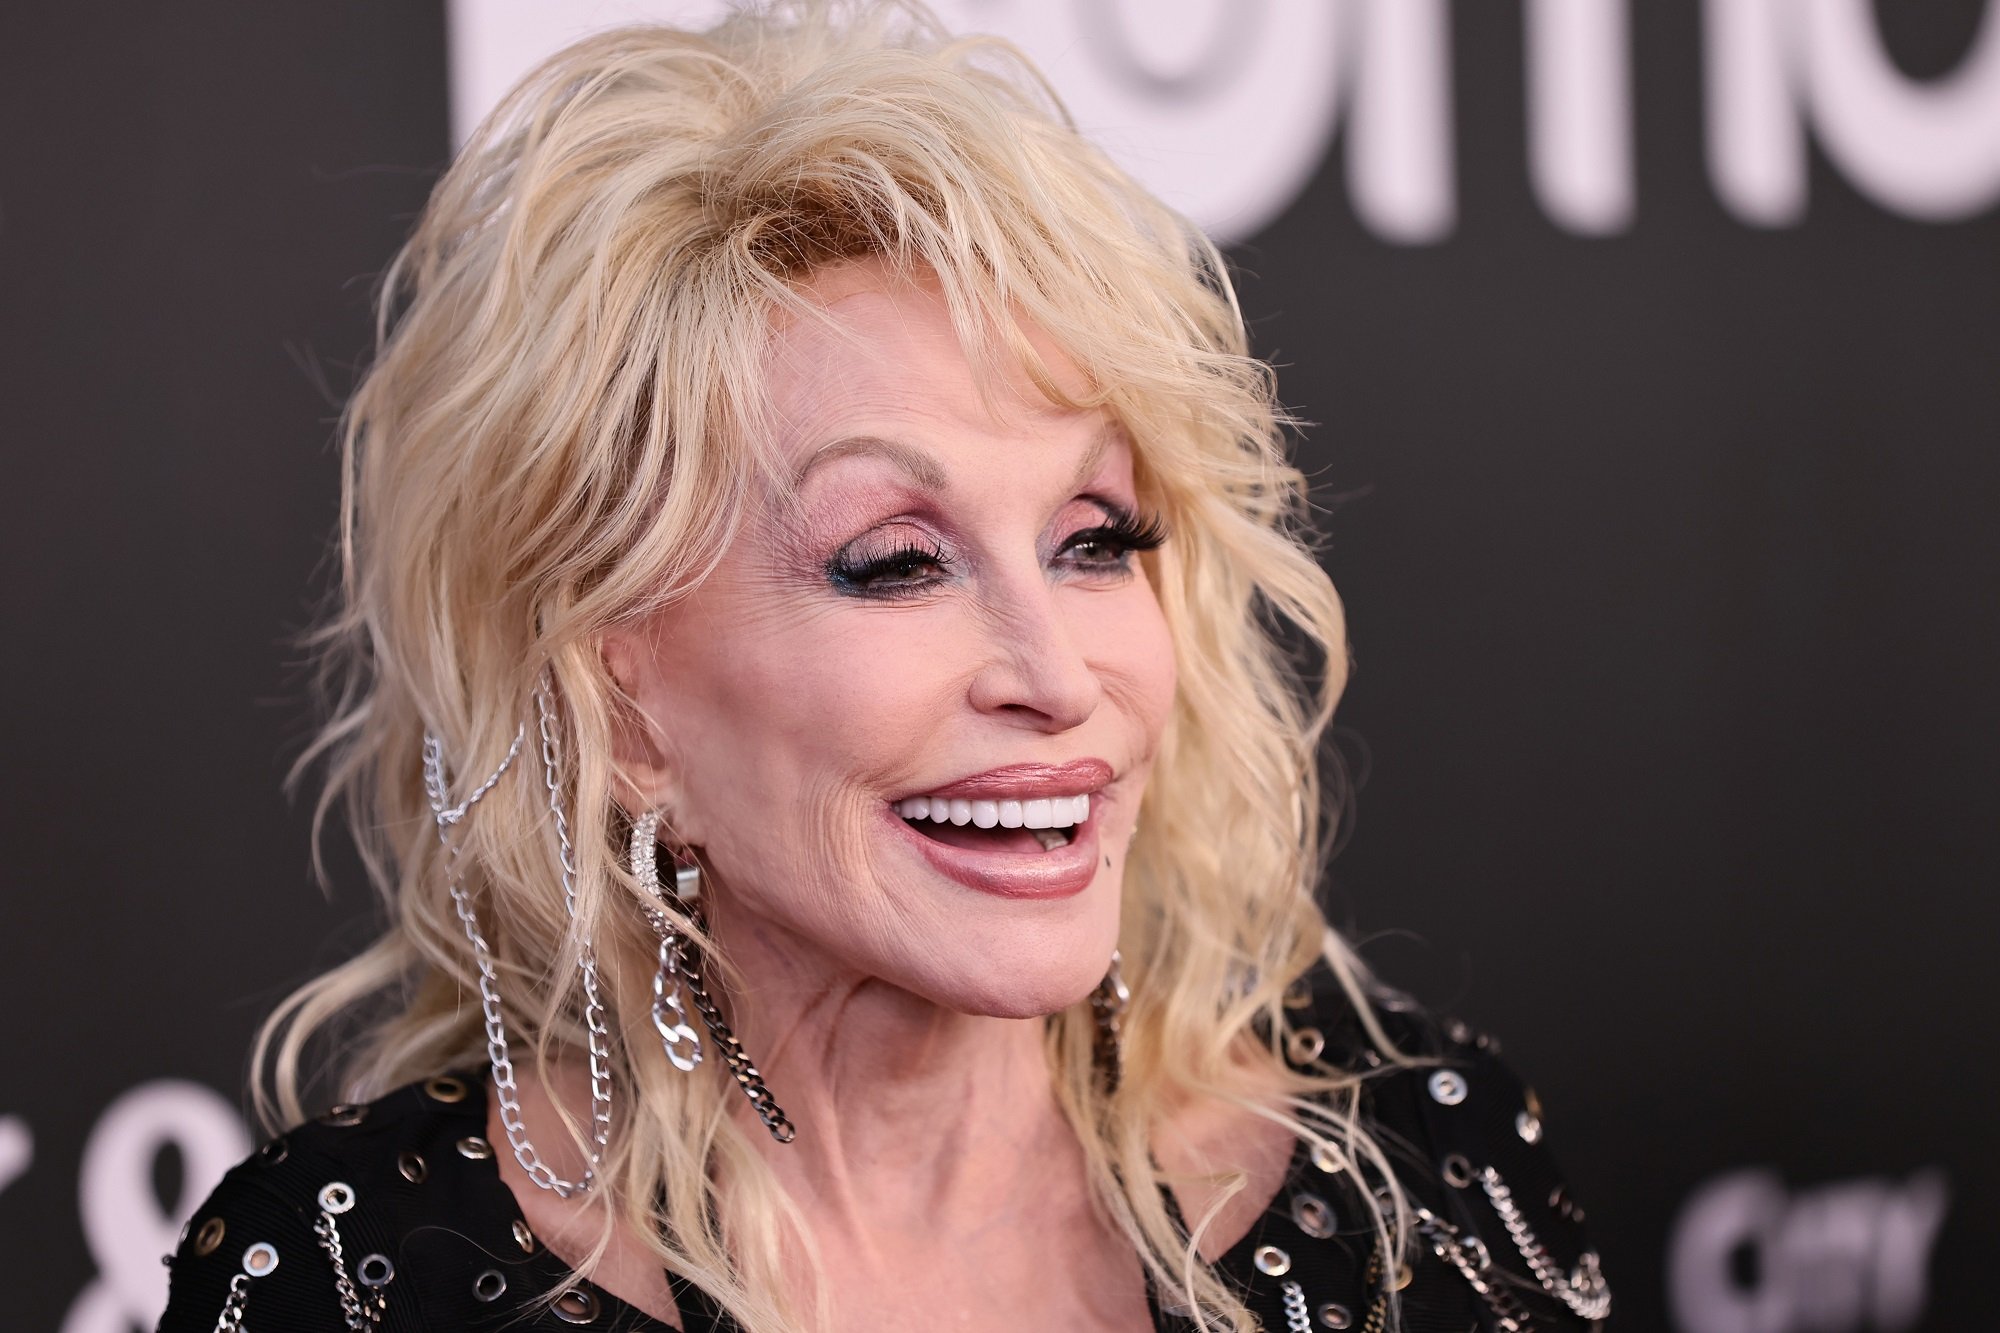 What You Need to Know About the $100M Prize Dolly Parton Was Awarded by Jeff Bezos